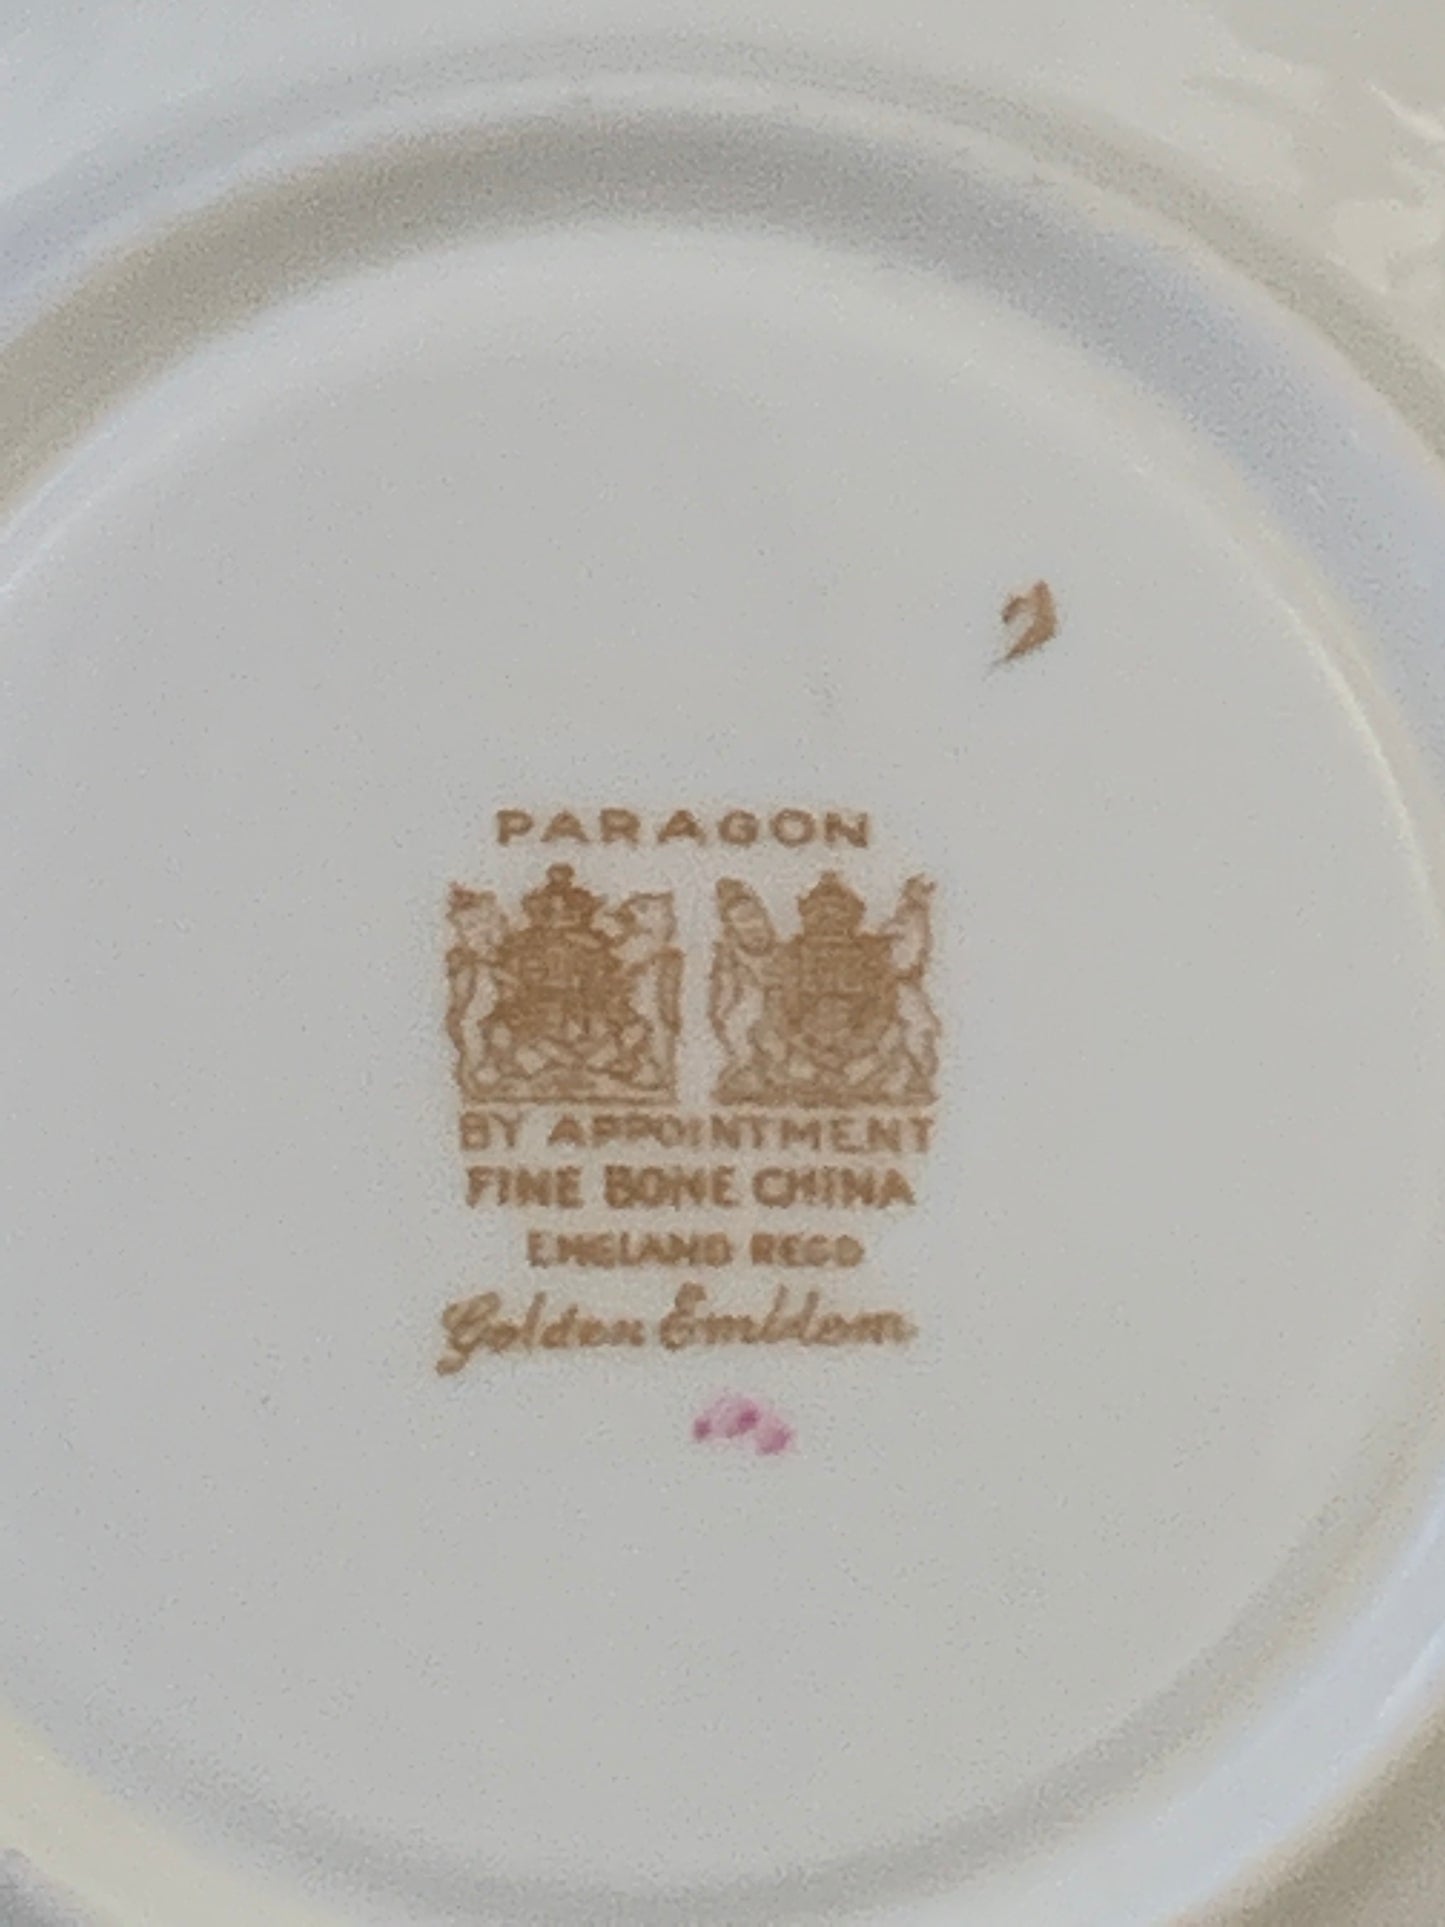 Paragon Double Warrant Tea Cup with Large Peach Roses